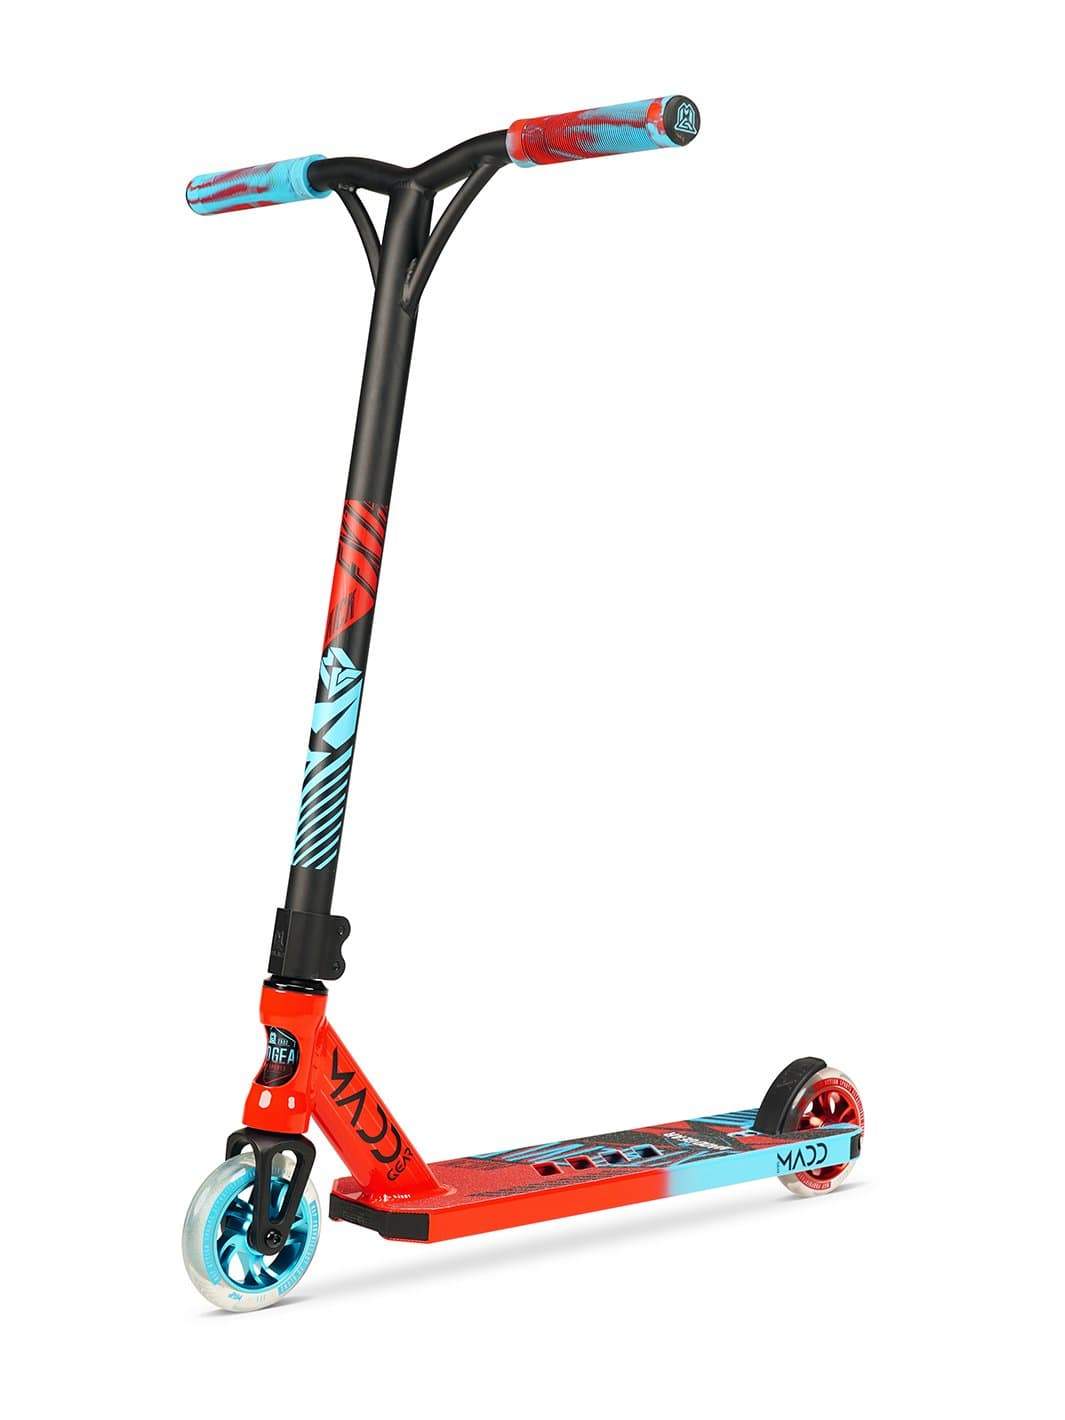 Madd Gear MGP Kick Extreme Stunt Scooter Complete High Quality Razor Pro Trick Skate Park Mad Red Blue